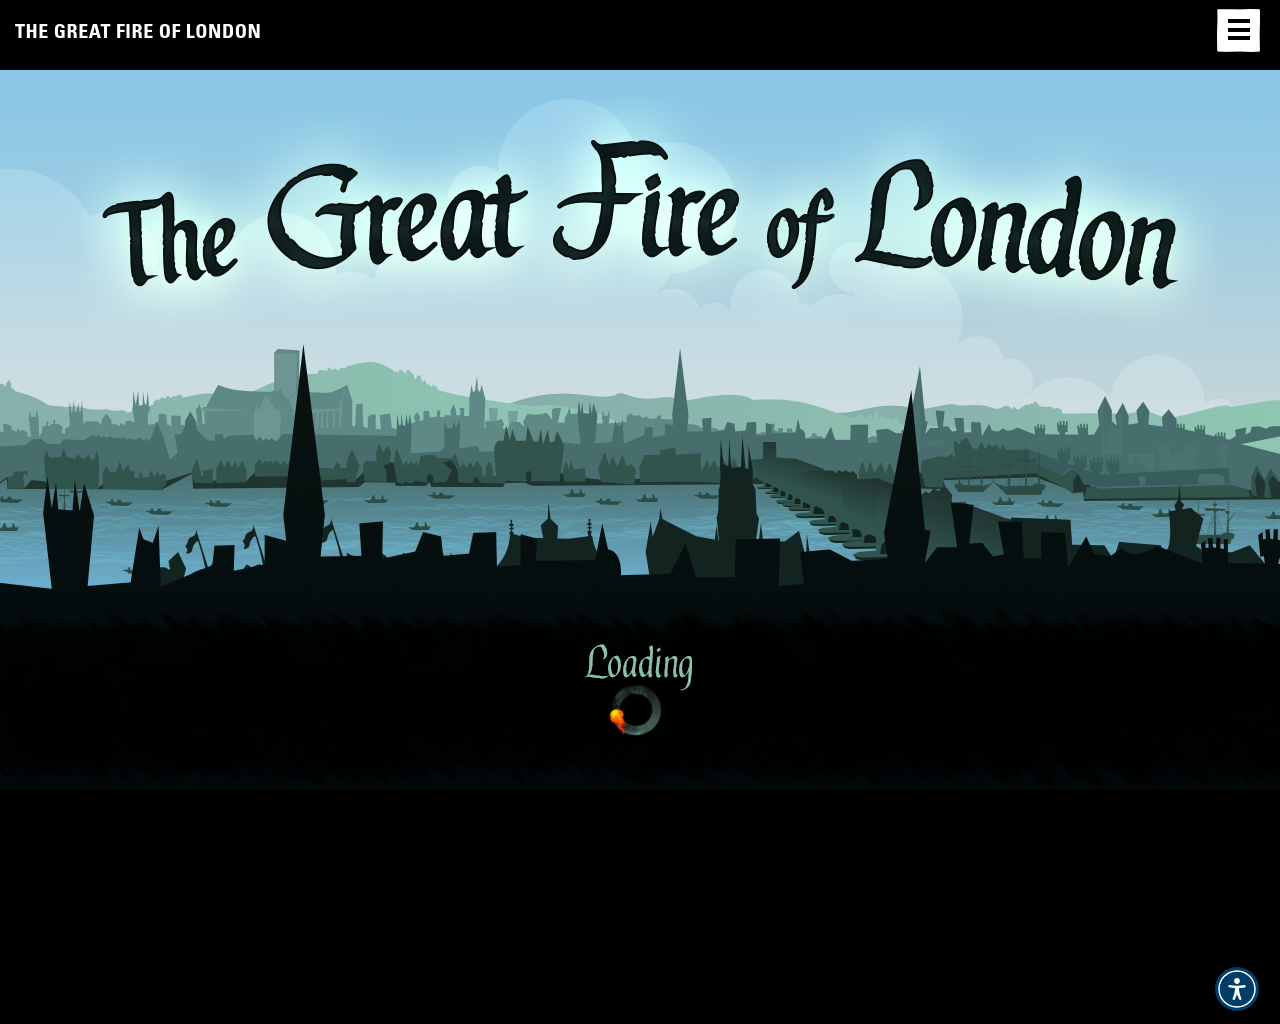 Great Fire of London: Play the Game